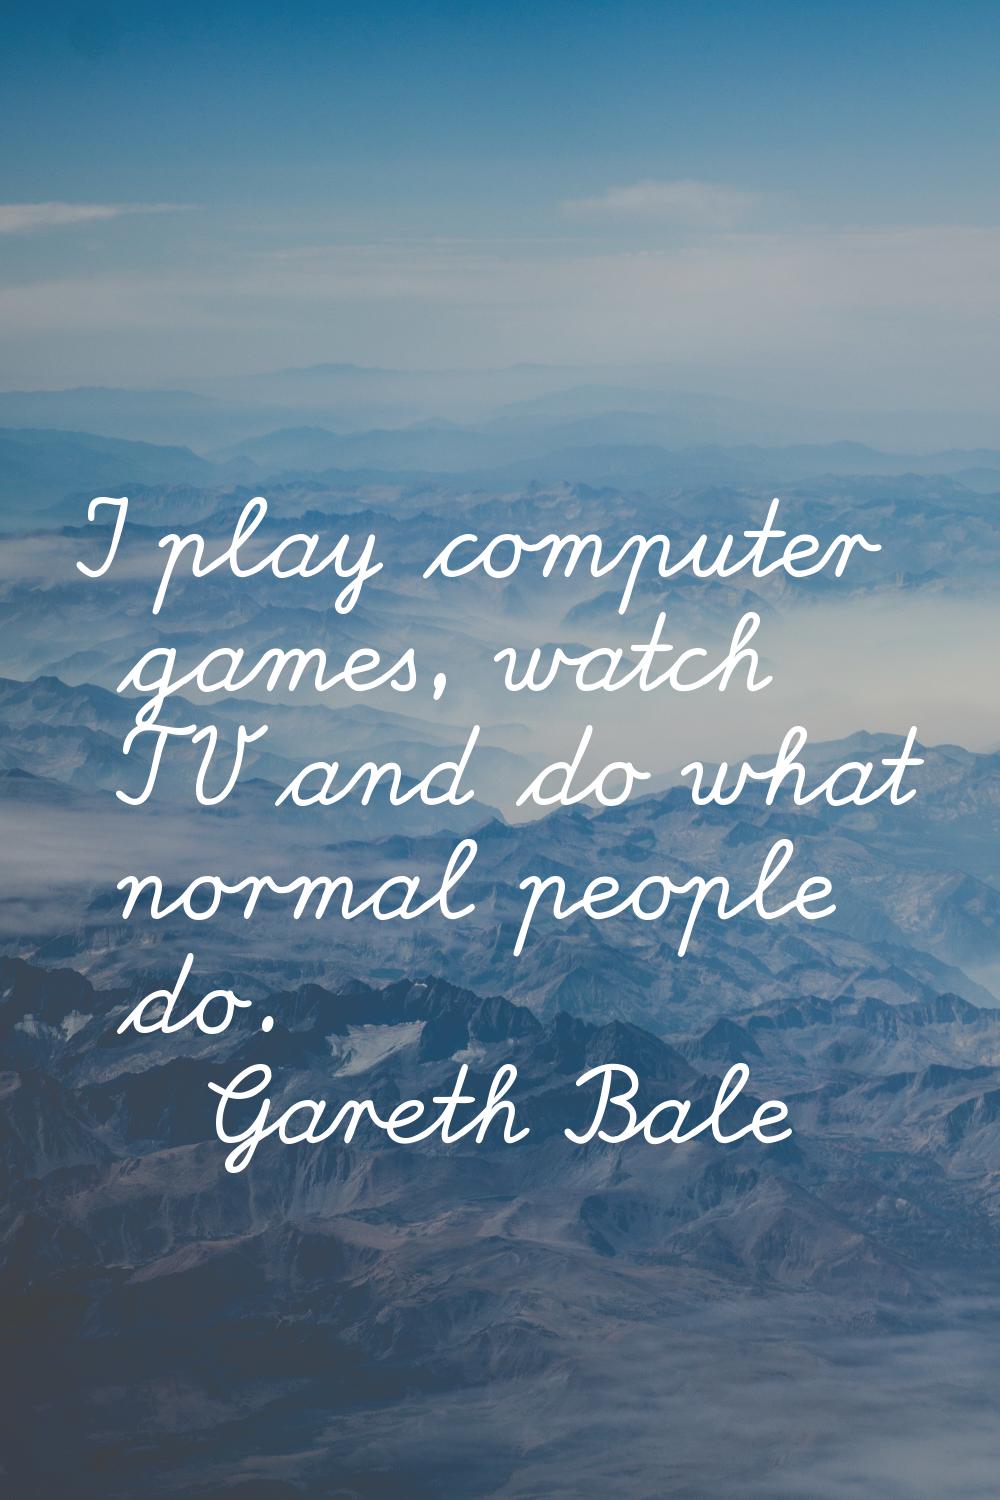 I play computer games, watch TV and do what normal people do.